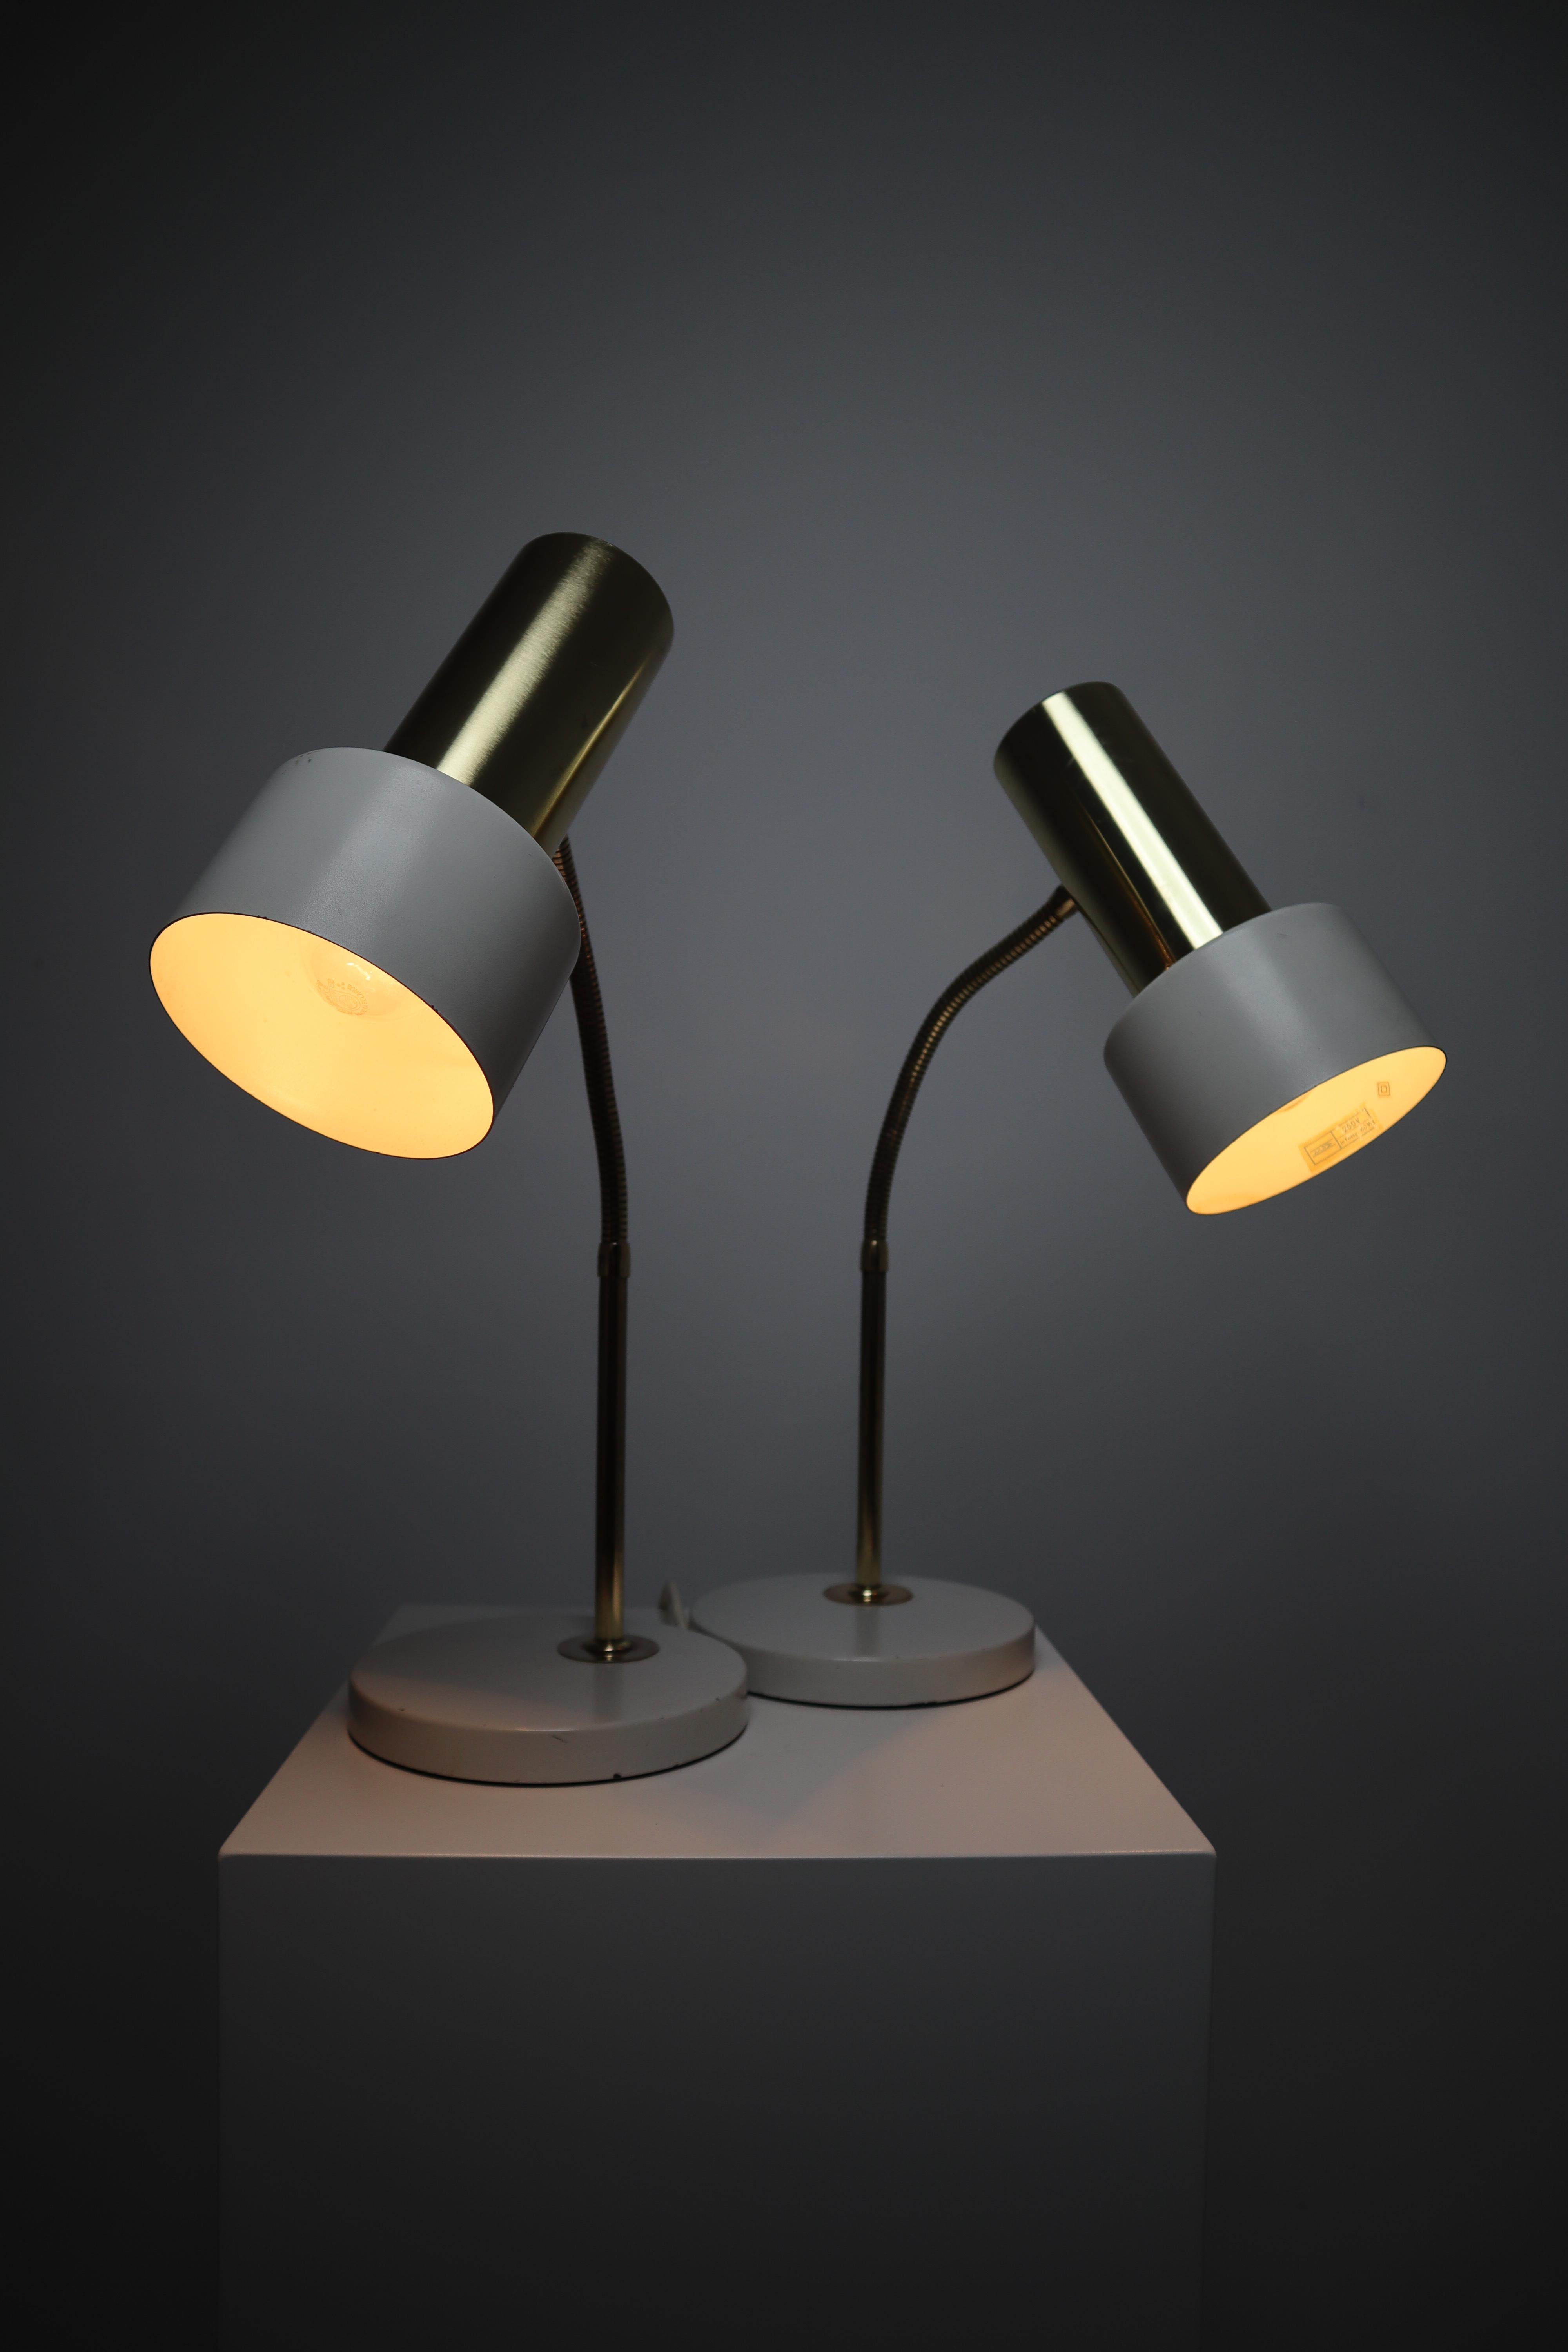 Pair of Mid-Century Modern desk or table lamps, bedside lights, Germany, 1970s, very elegant design with brass details.